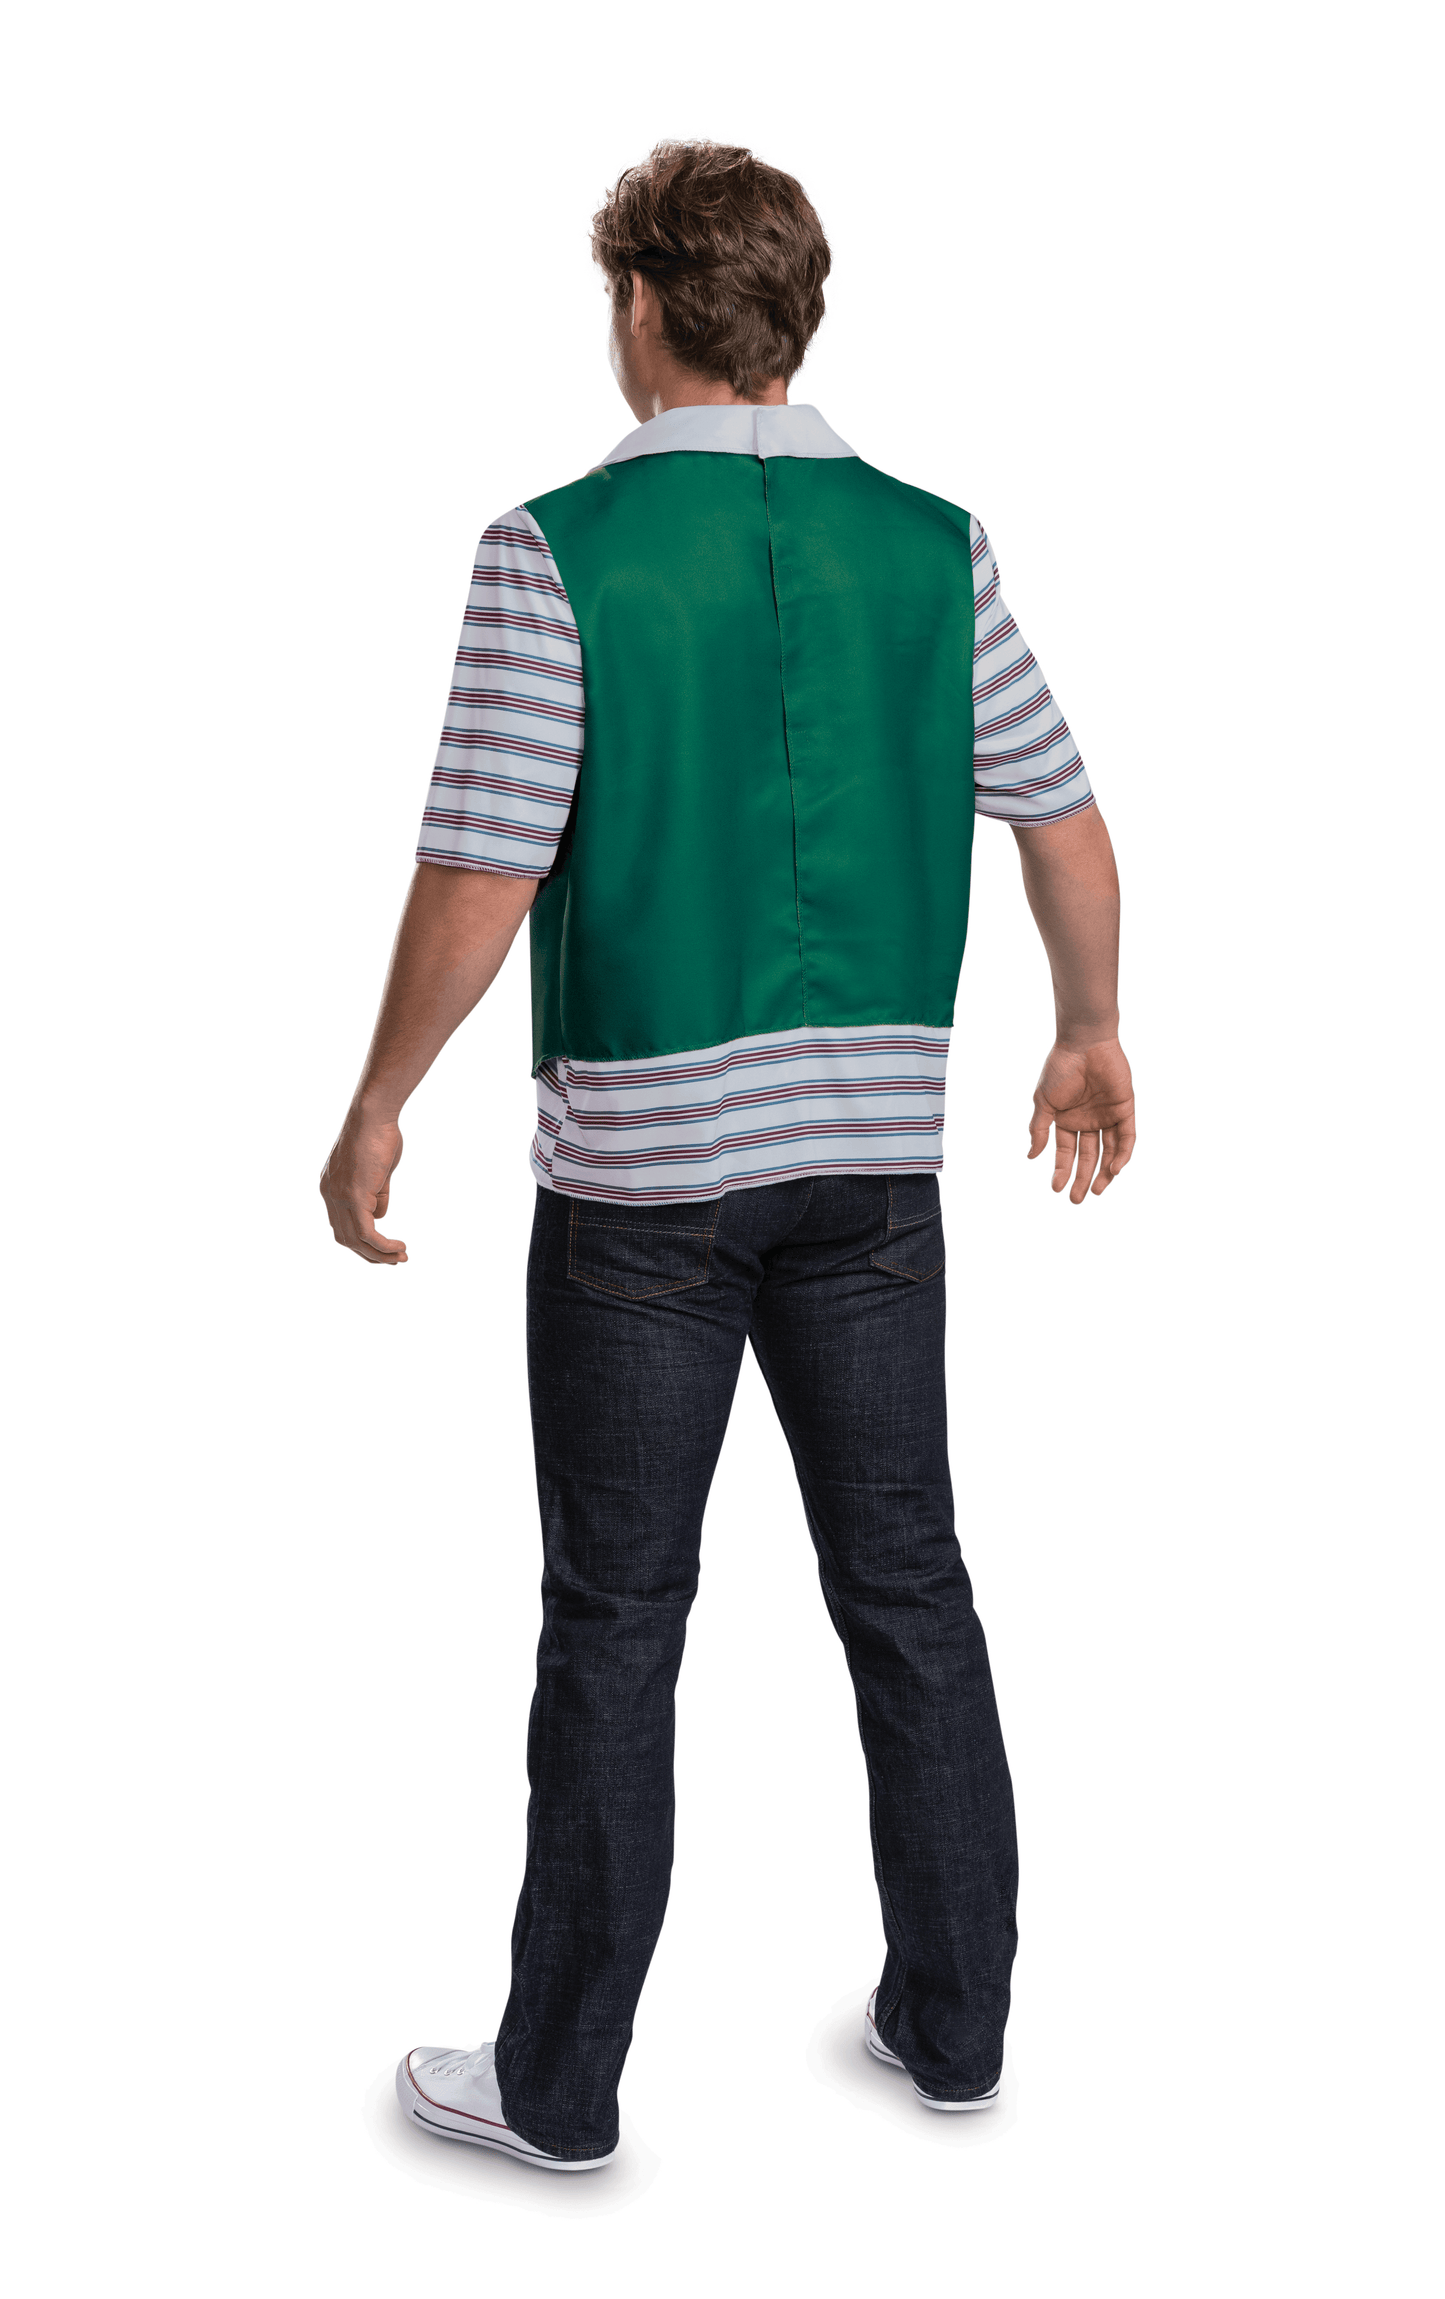 Adult Steve from Stranger Things 4 Deluxe Costume - McCabe's Costumes